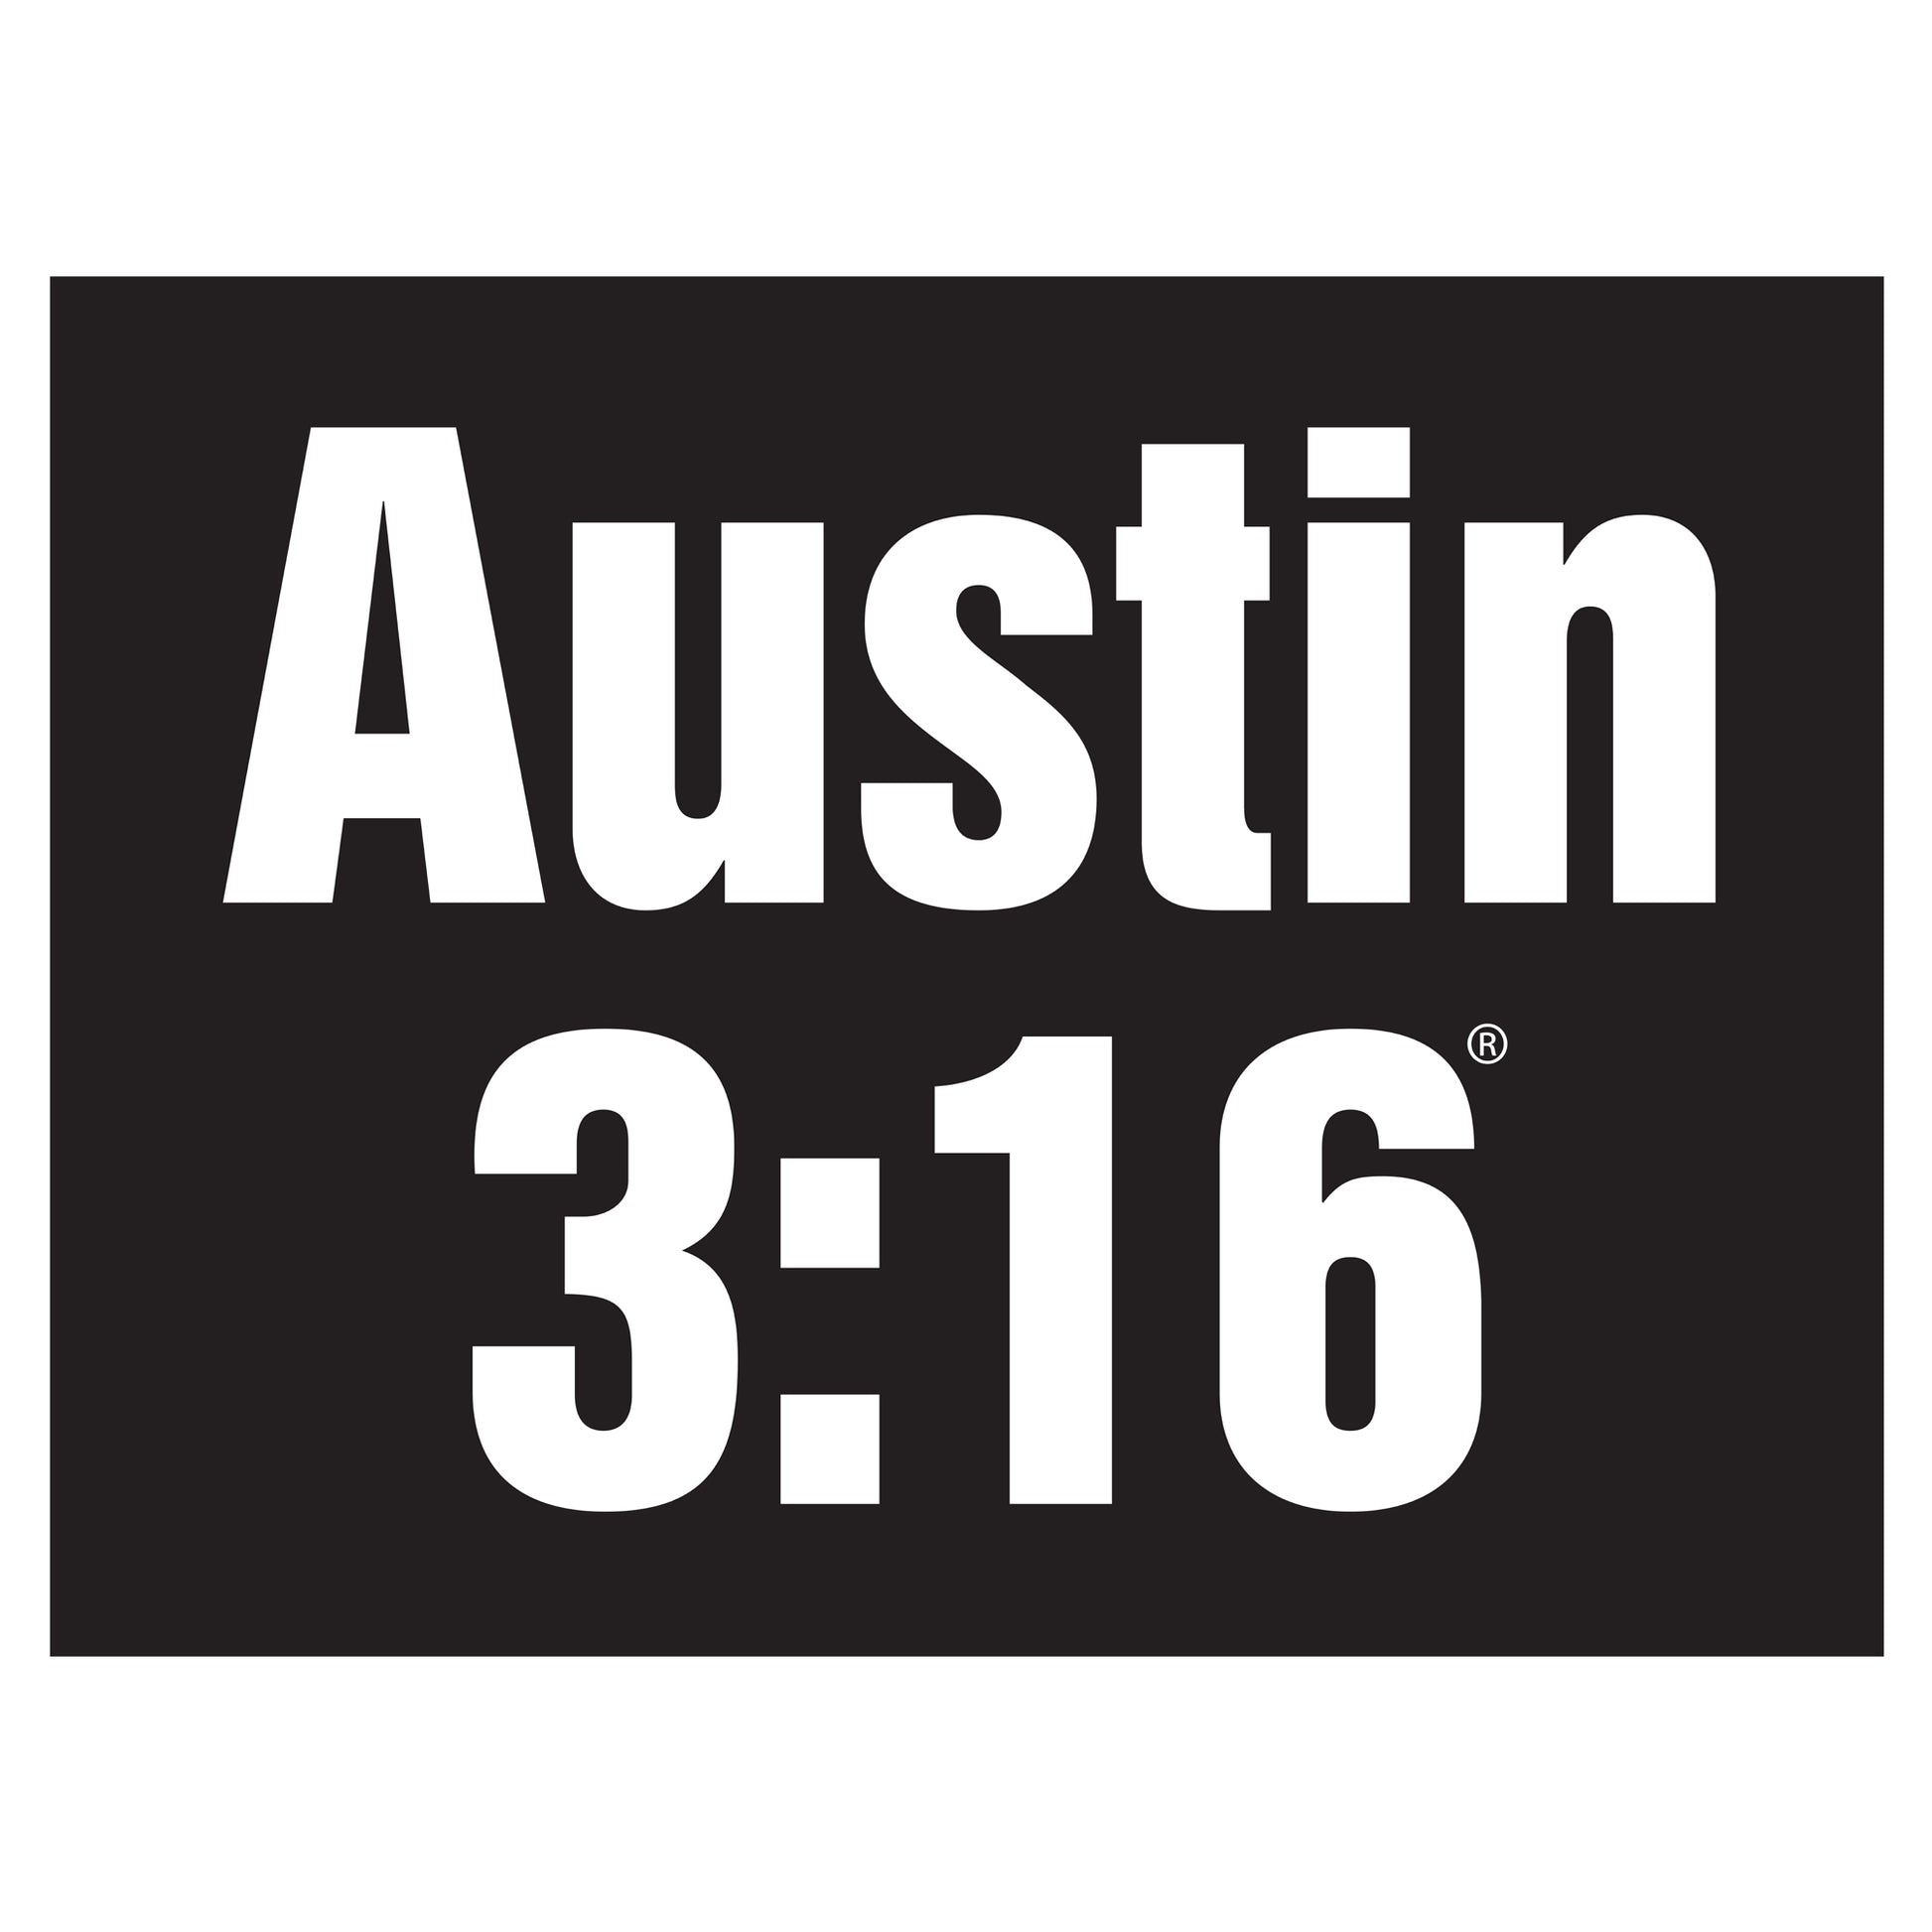 Stone Cold Steve Austin 2021 Austin 3:16 Mural - Officially Licensed WWE  Removable Wall Adhesive Decal